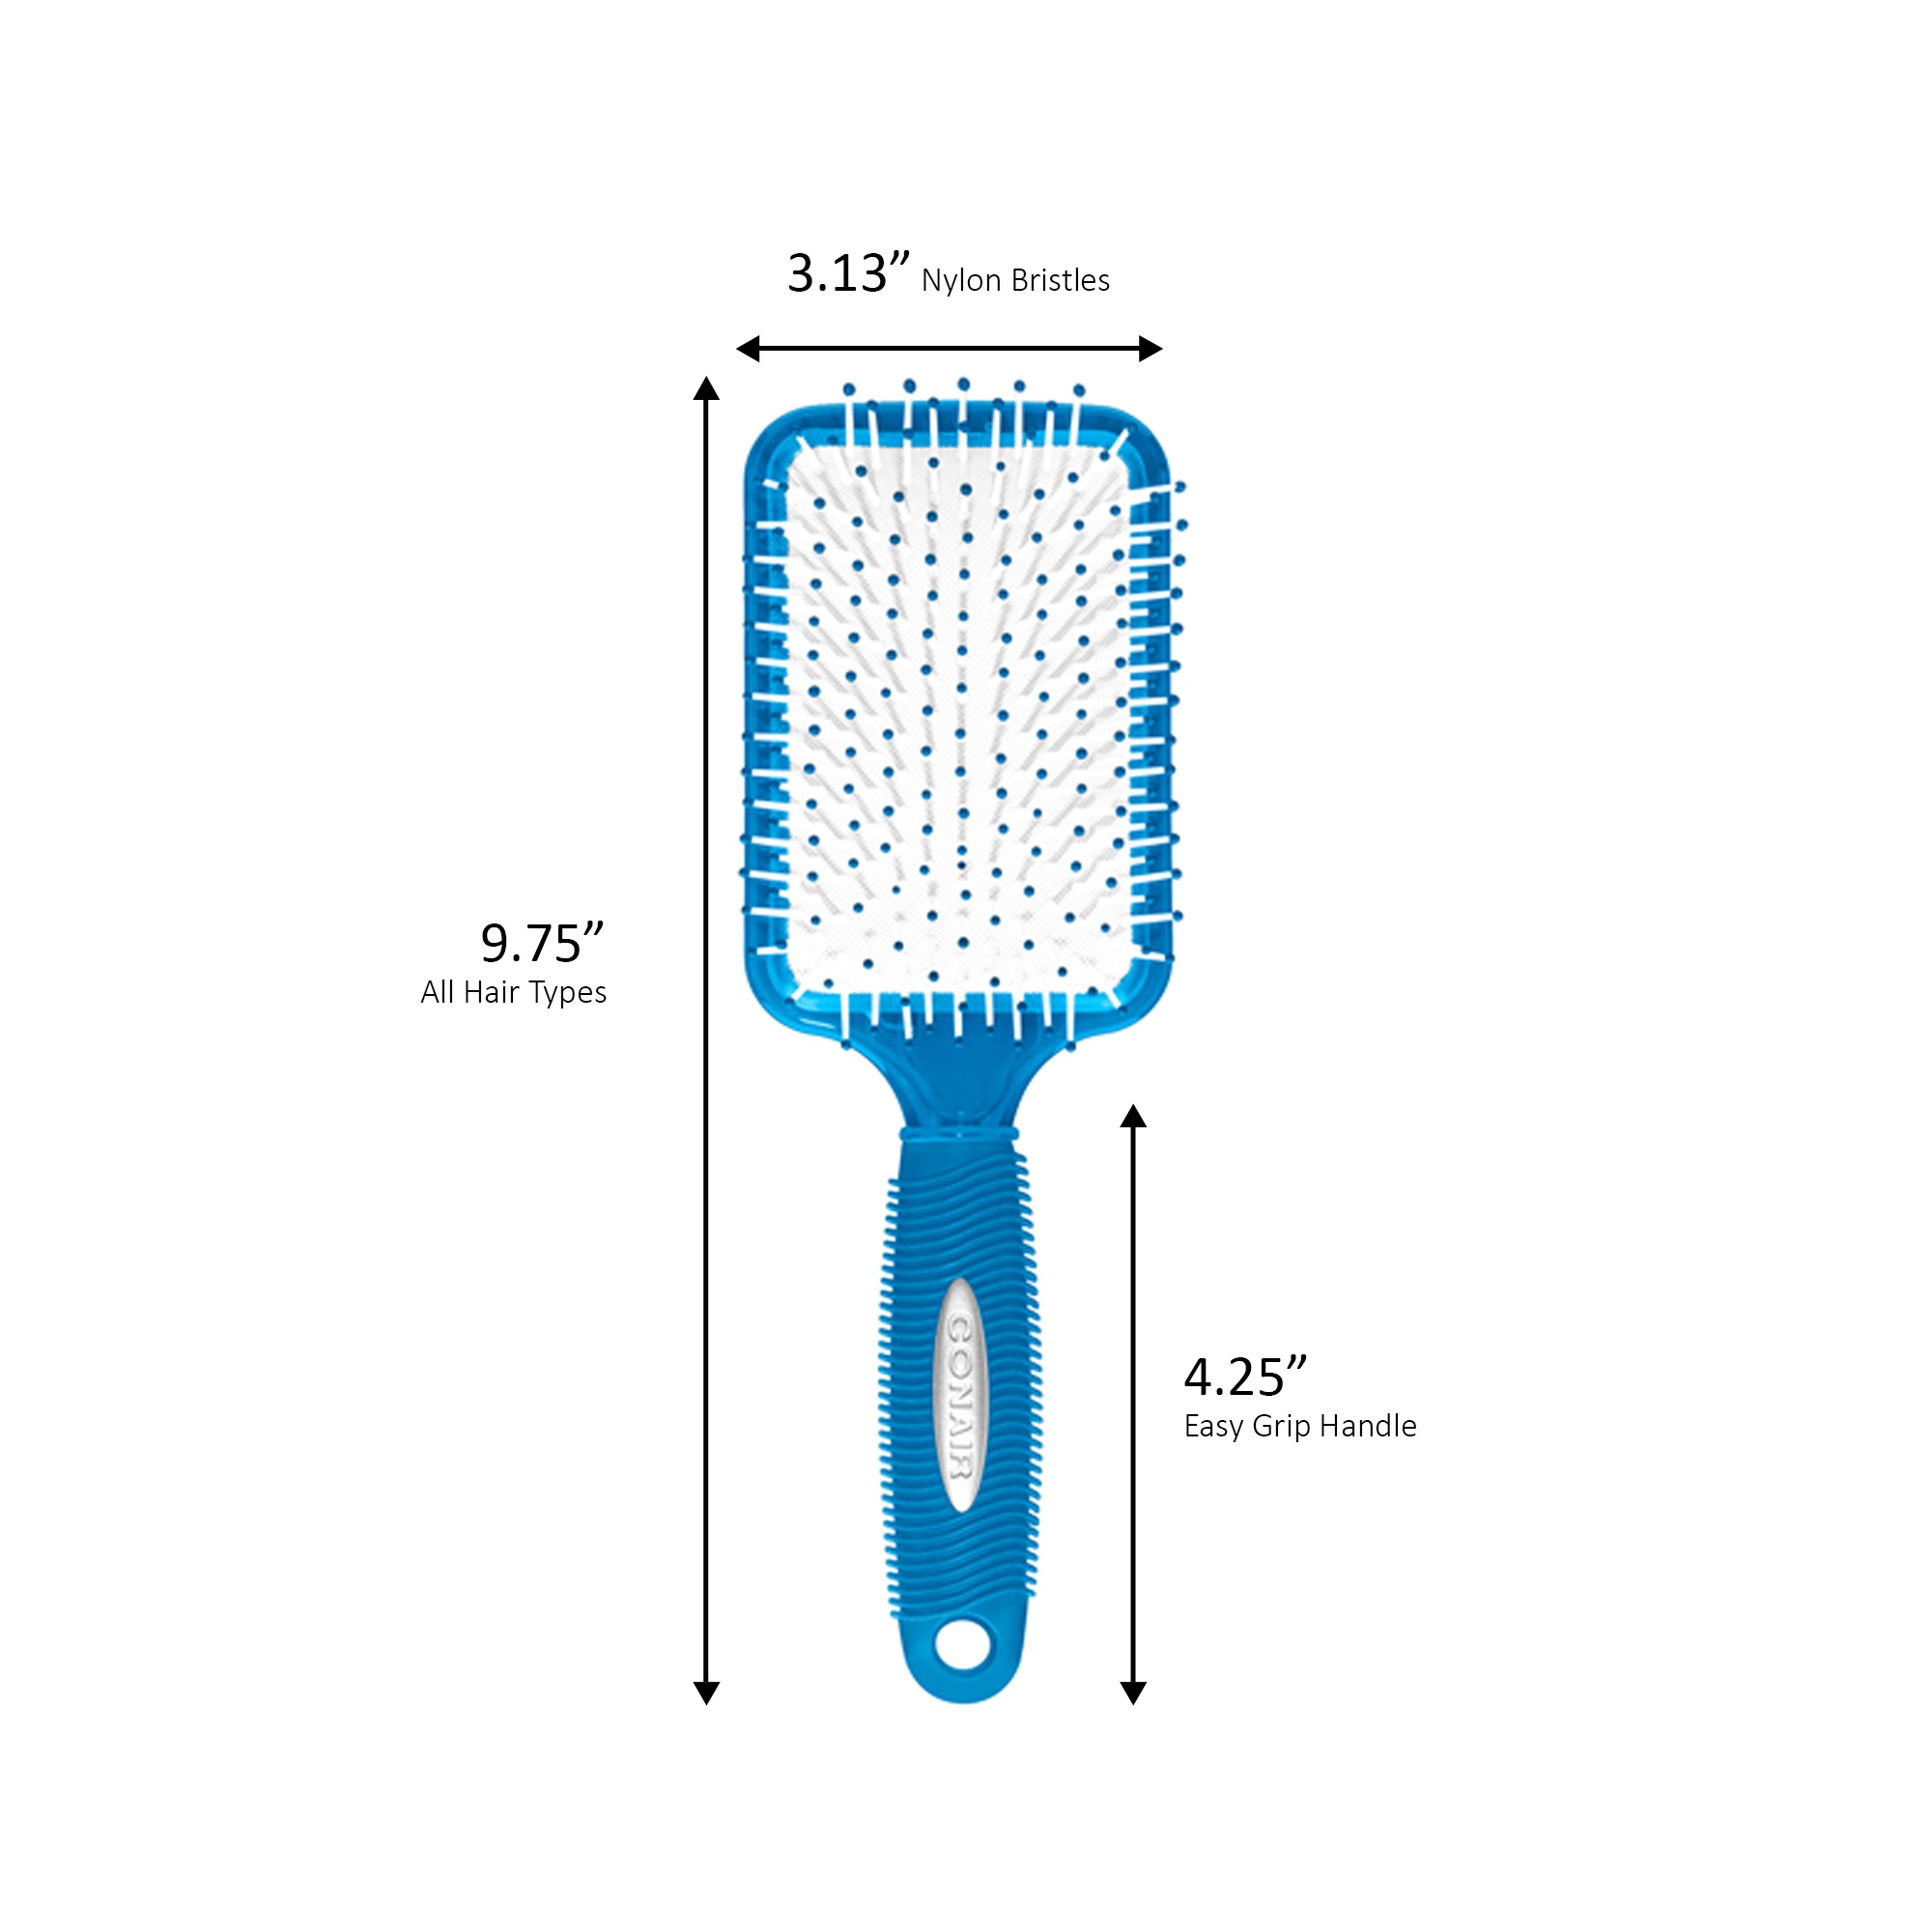 Conair in Color Nylon Bristle Paddle Hairbrush, Colors Vary - image 3 of 9